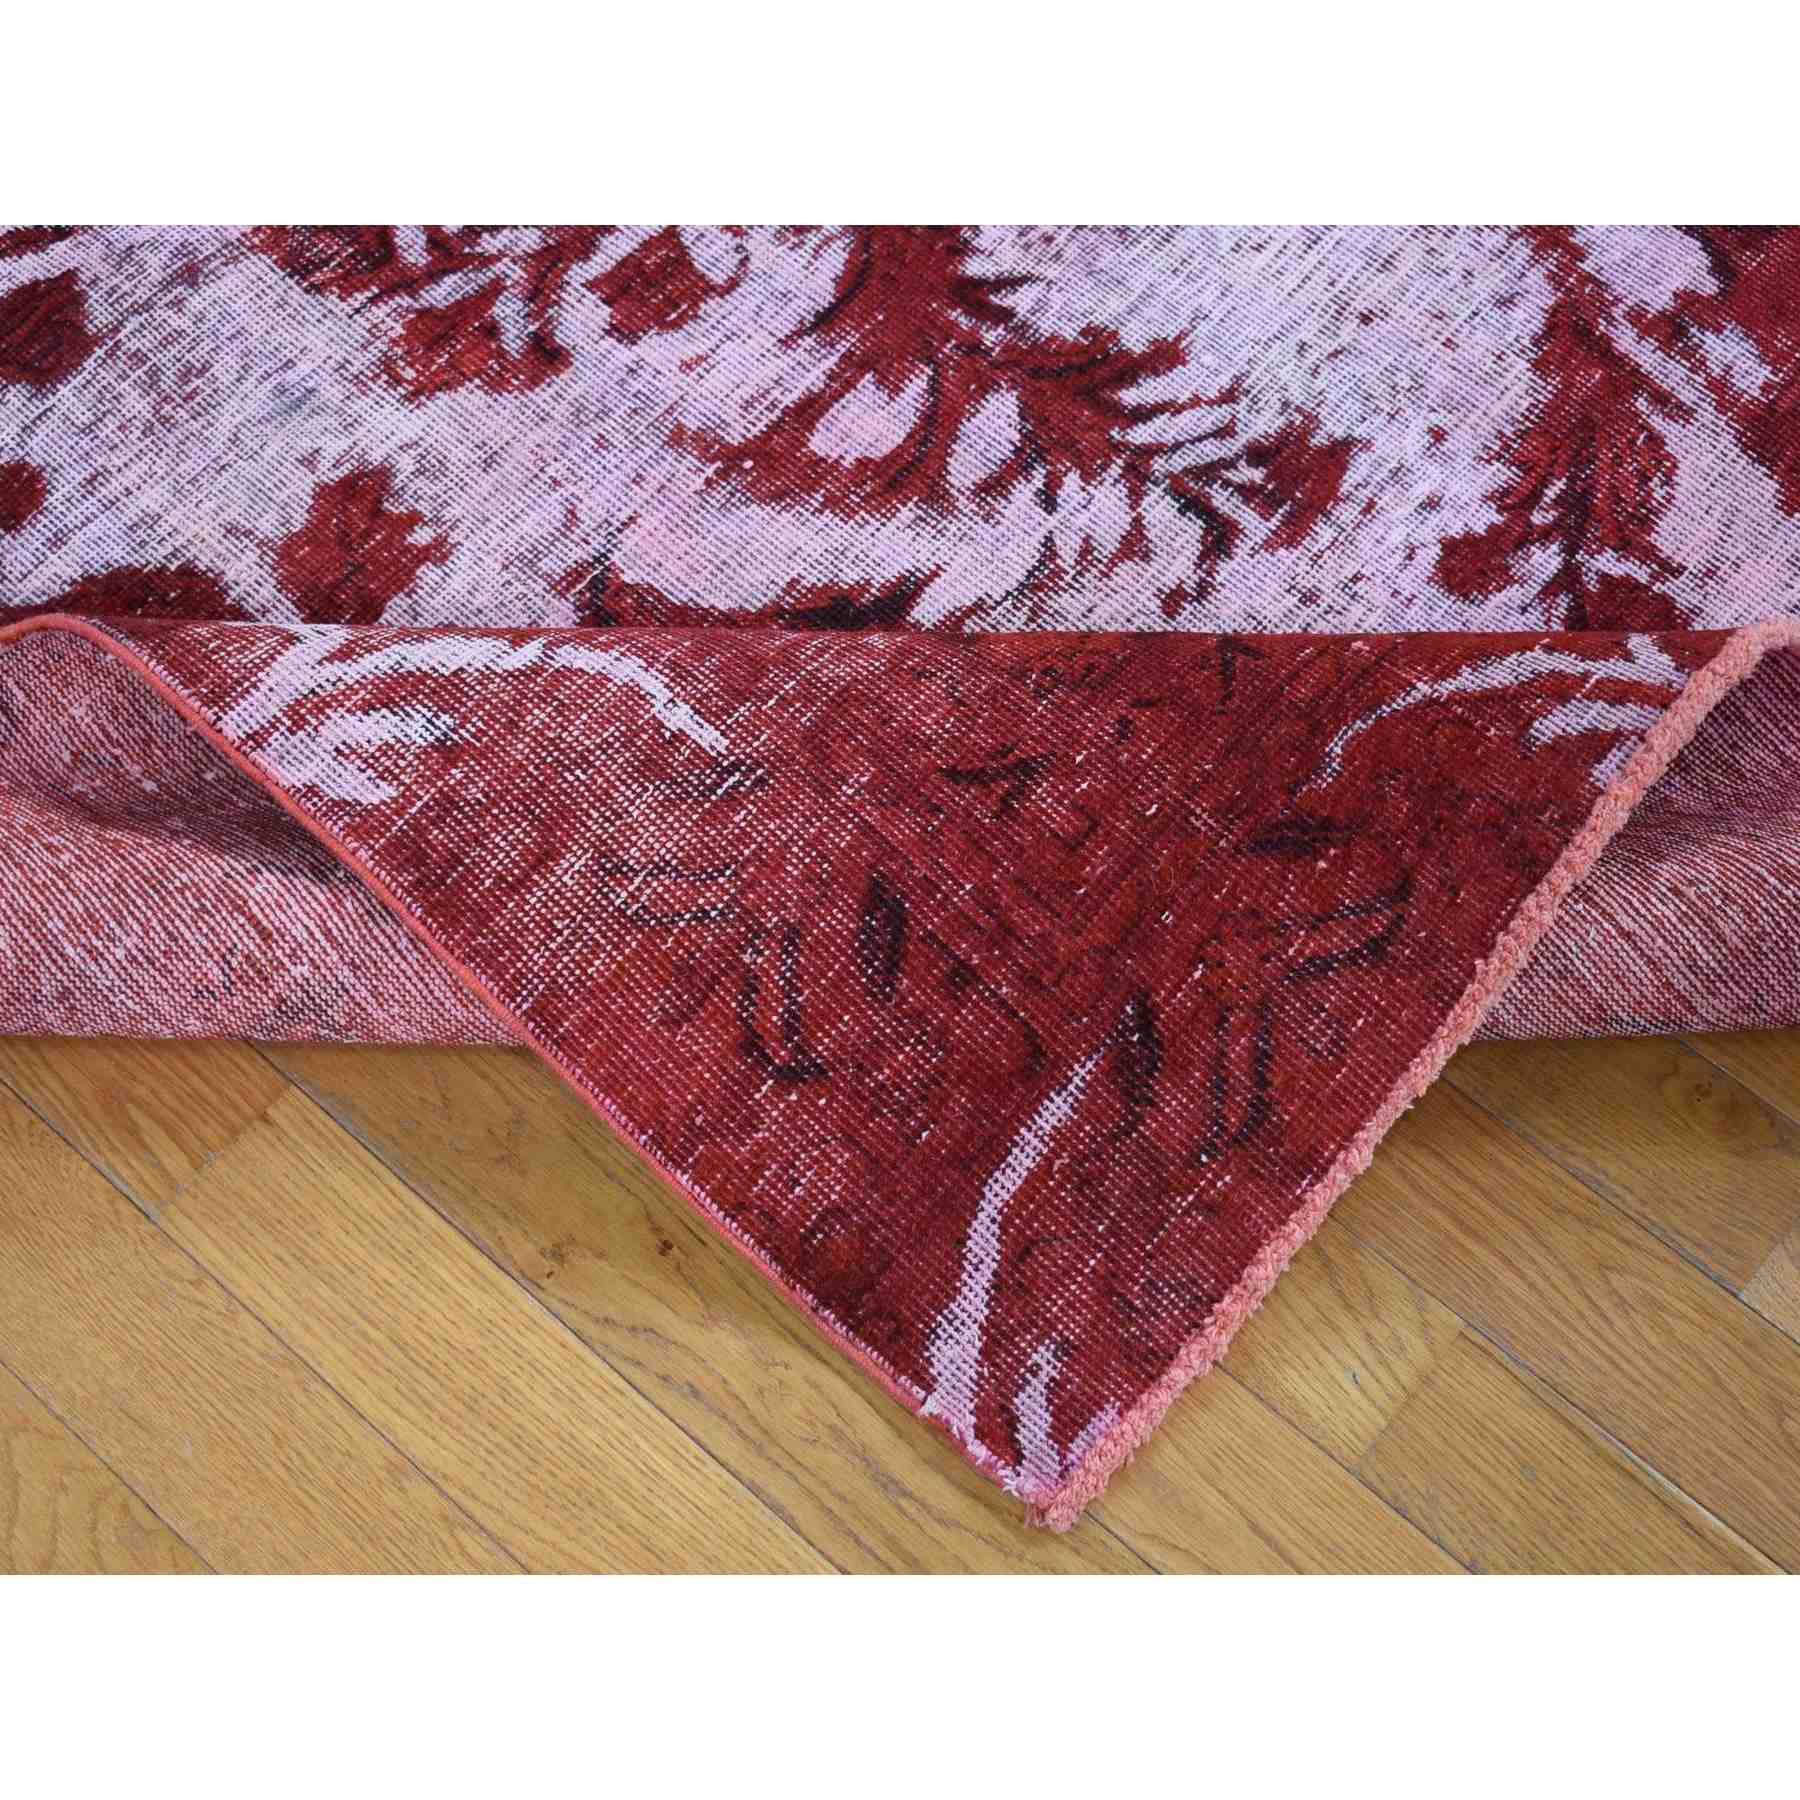 Overdyed-Vintage-Hand-Knotted-Rug-403470